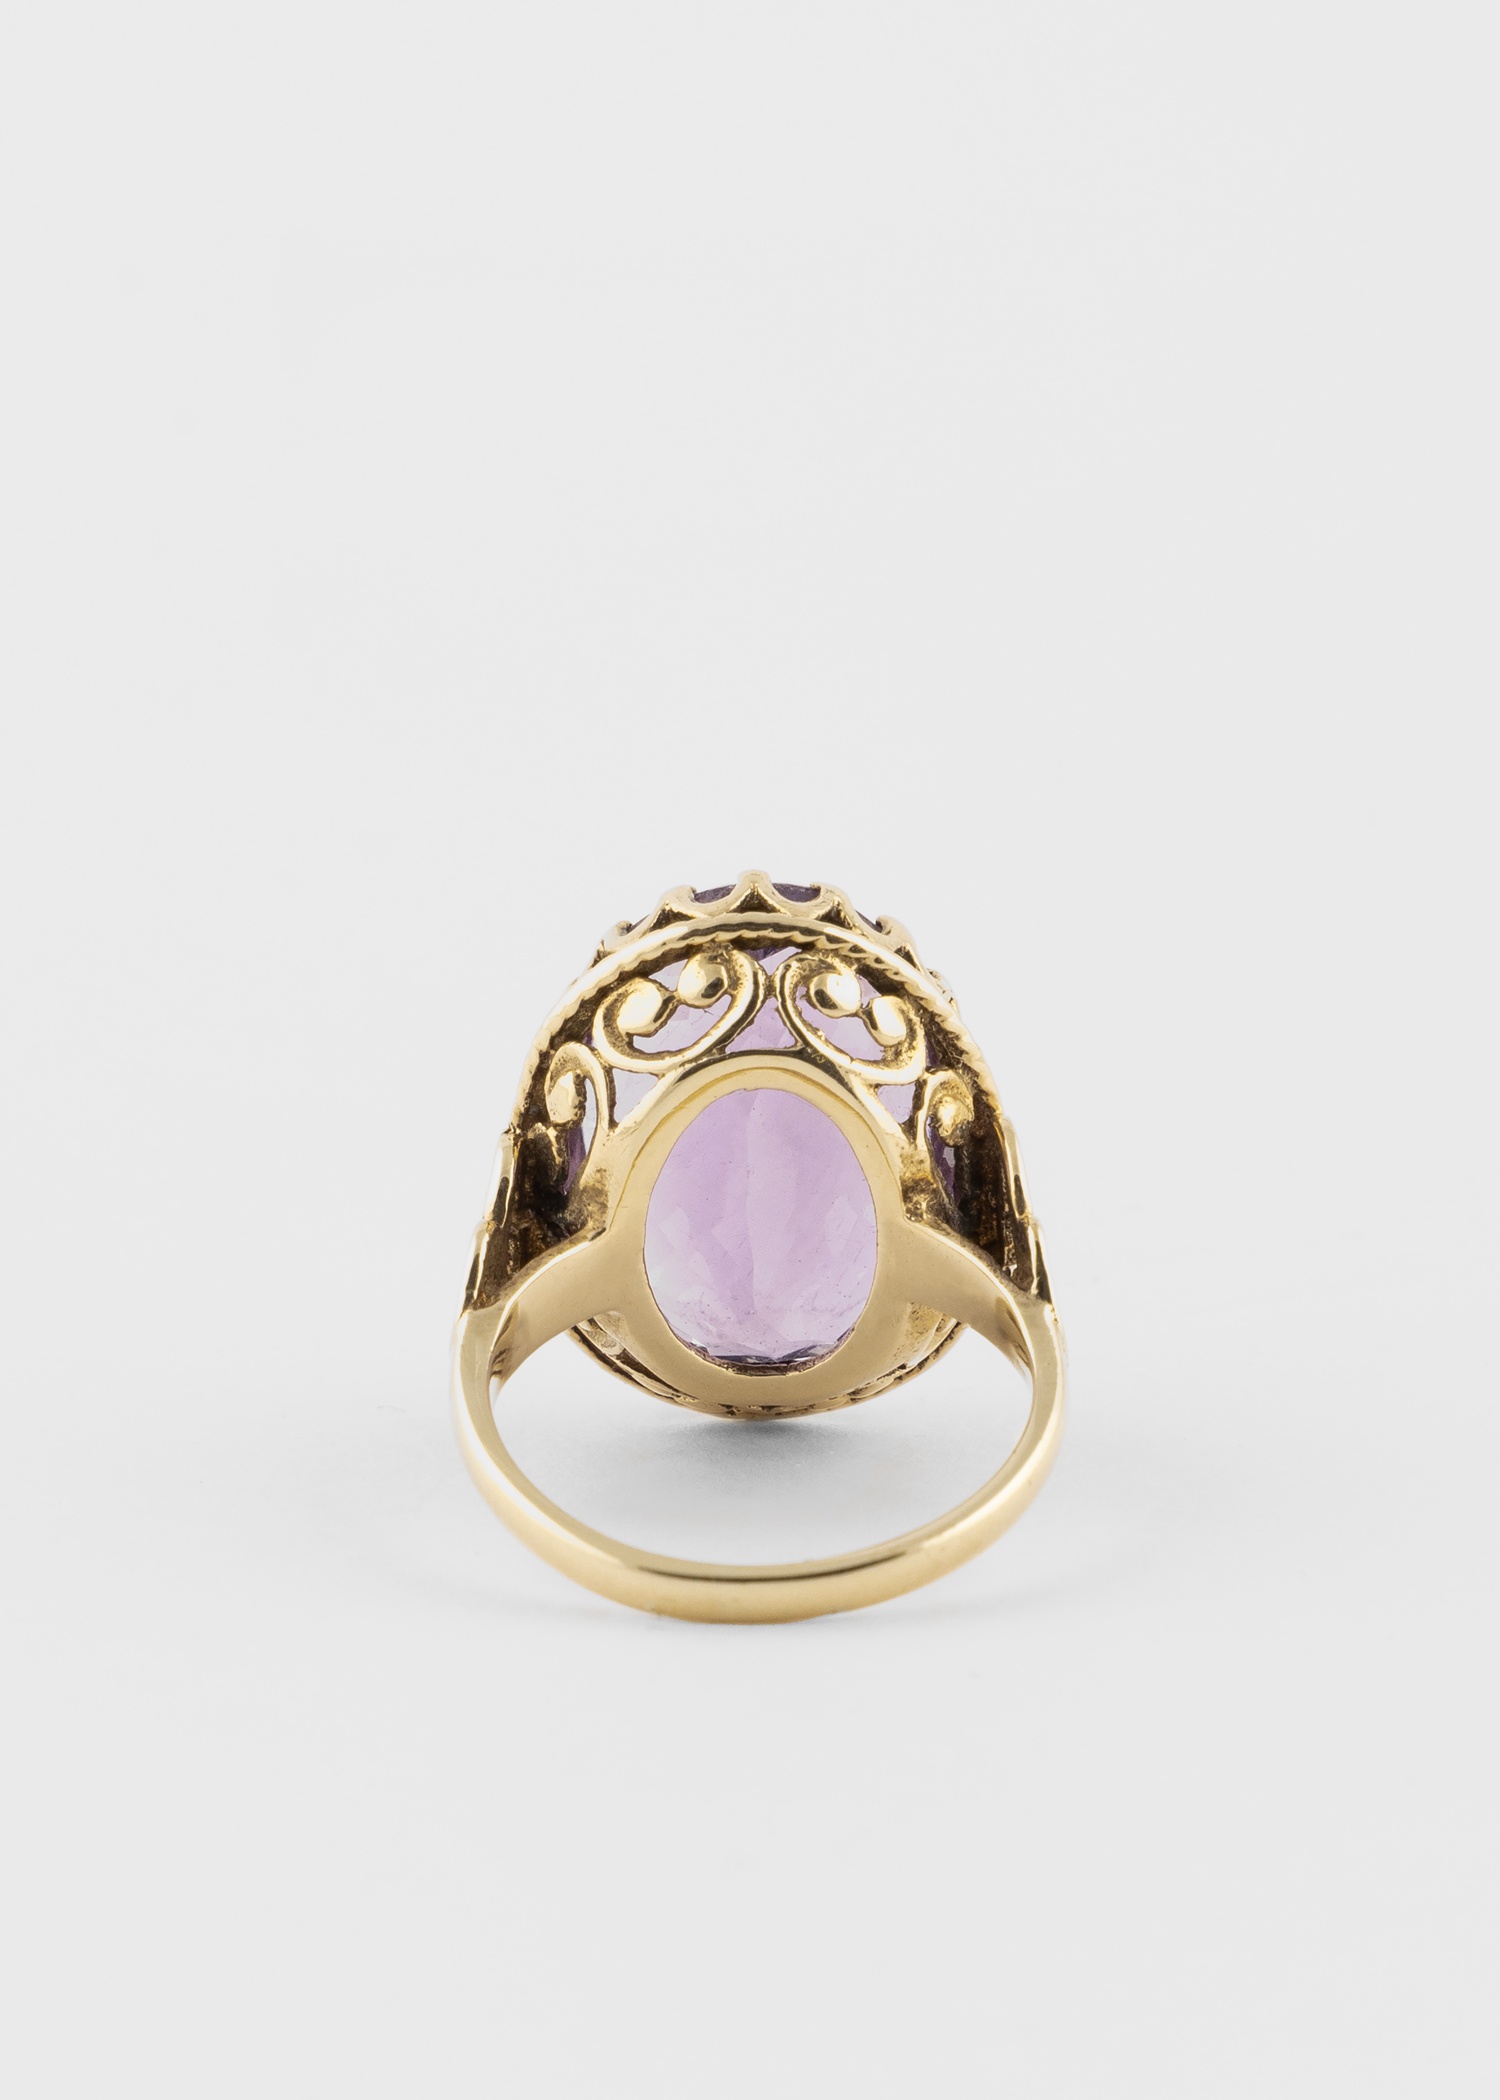 'Enormous Amethyst' Cocktail Ring by Baroque Rocks - 4